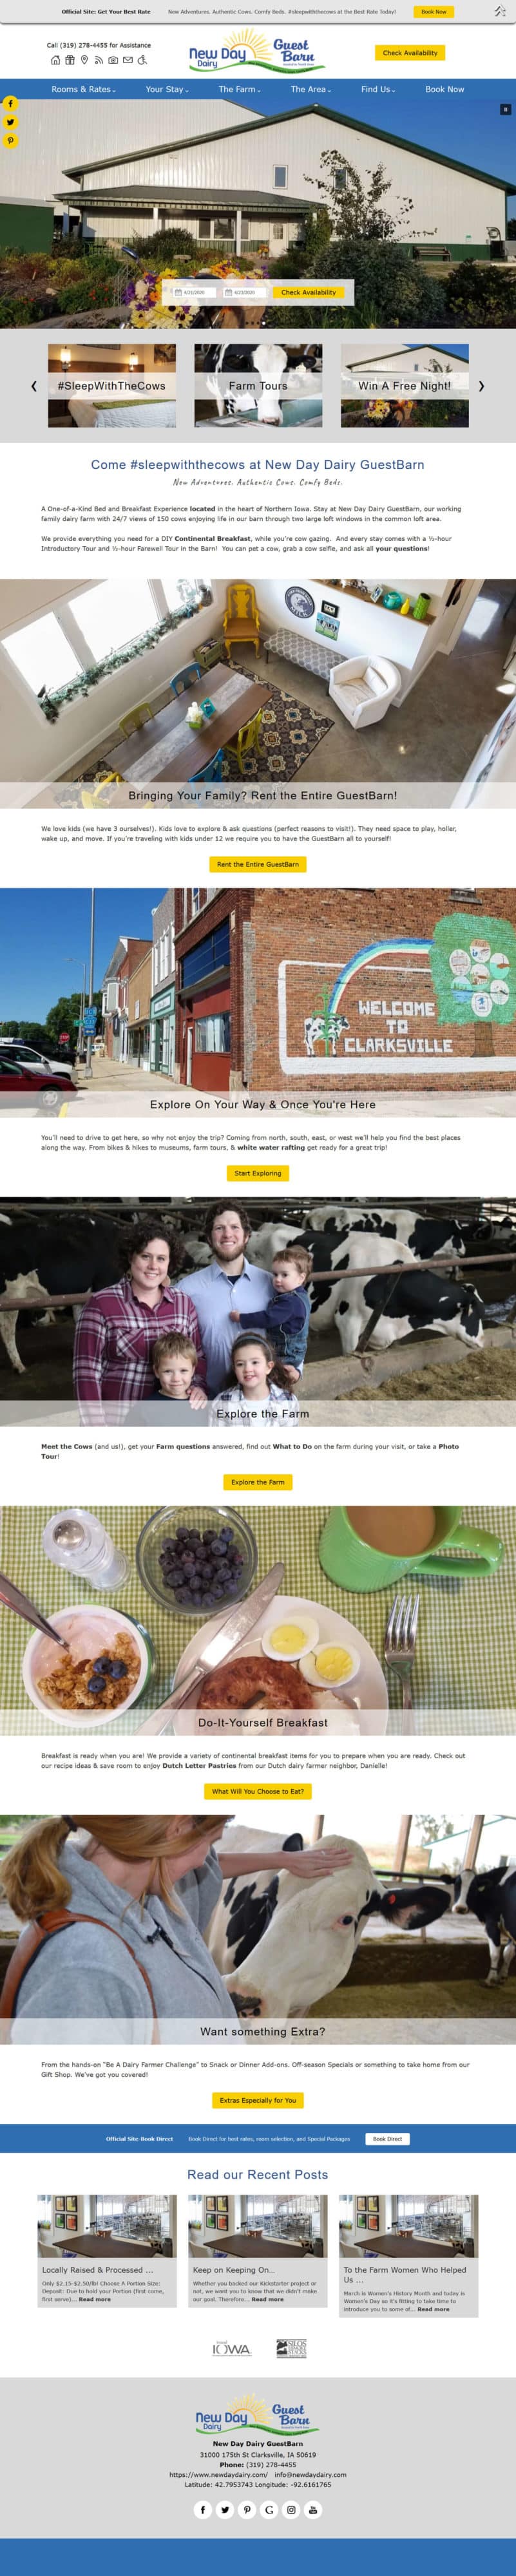 Screenshot of the home page of New Day Dairy Guest Barn